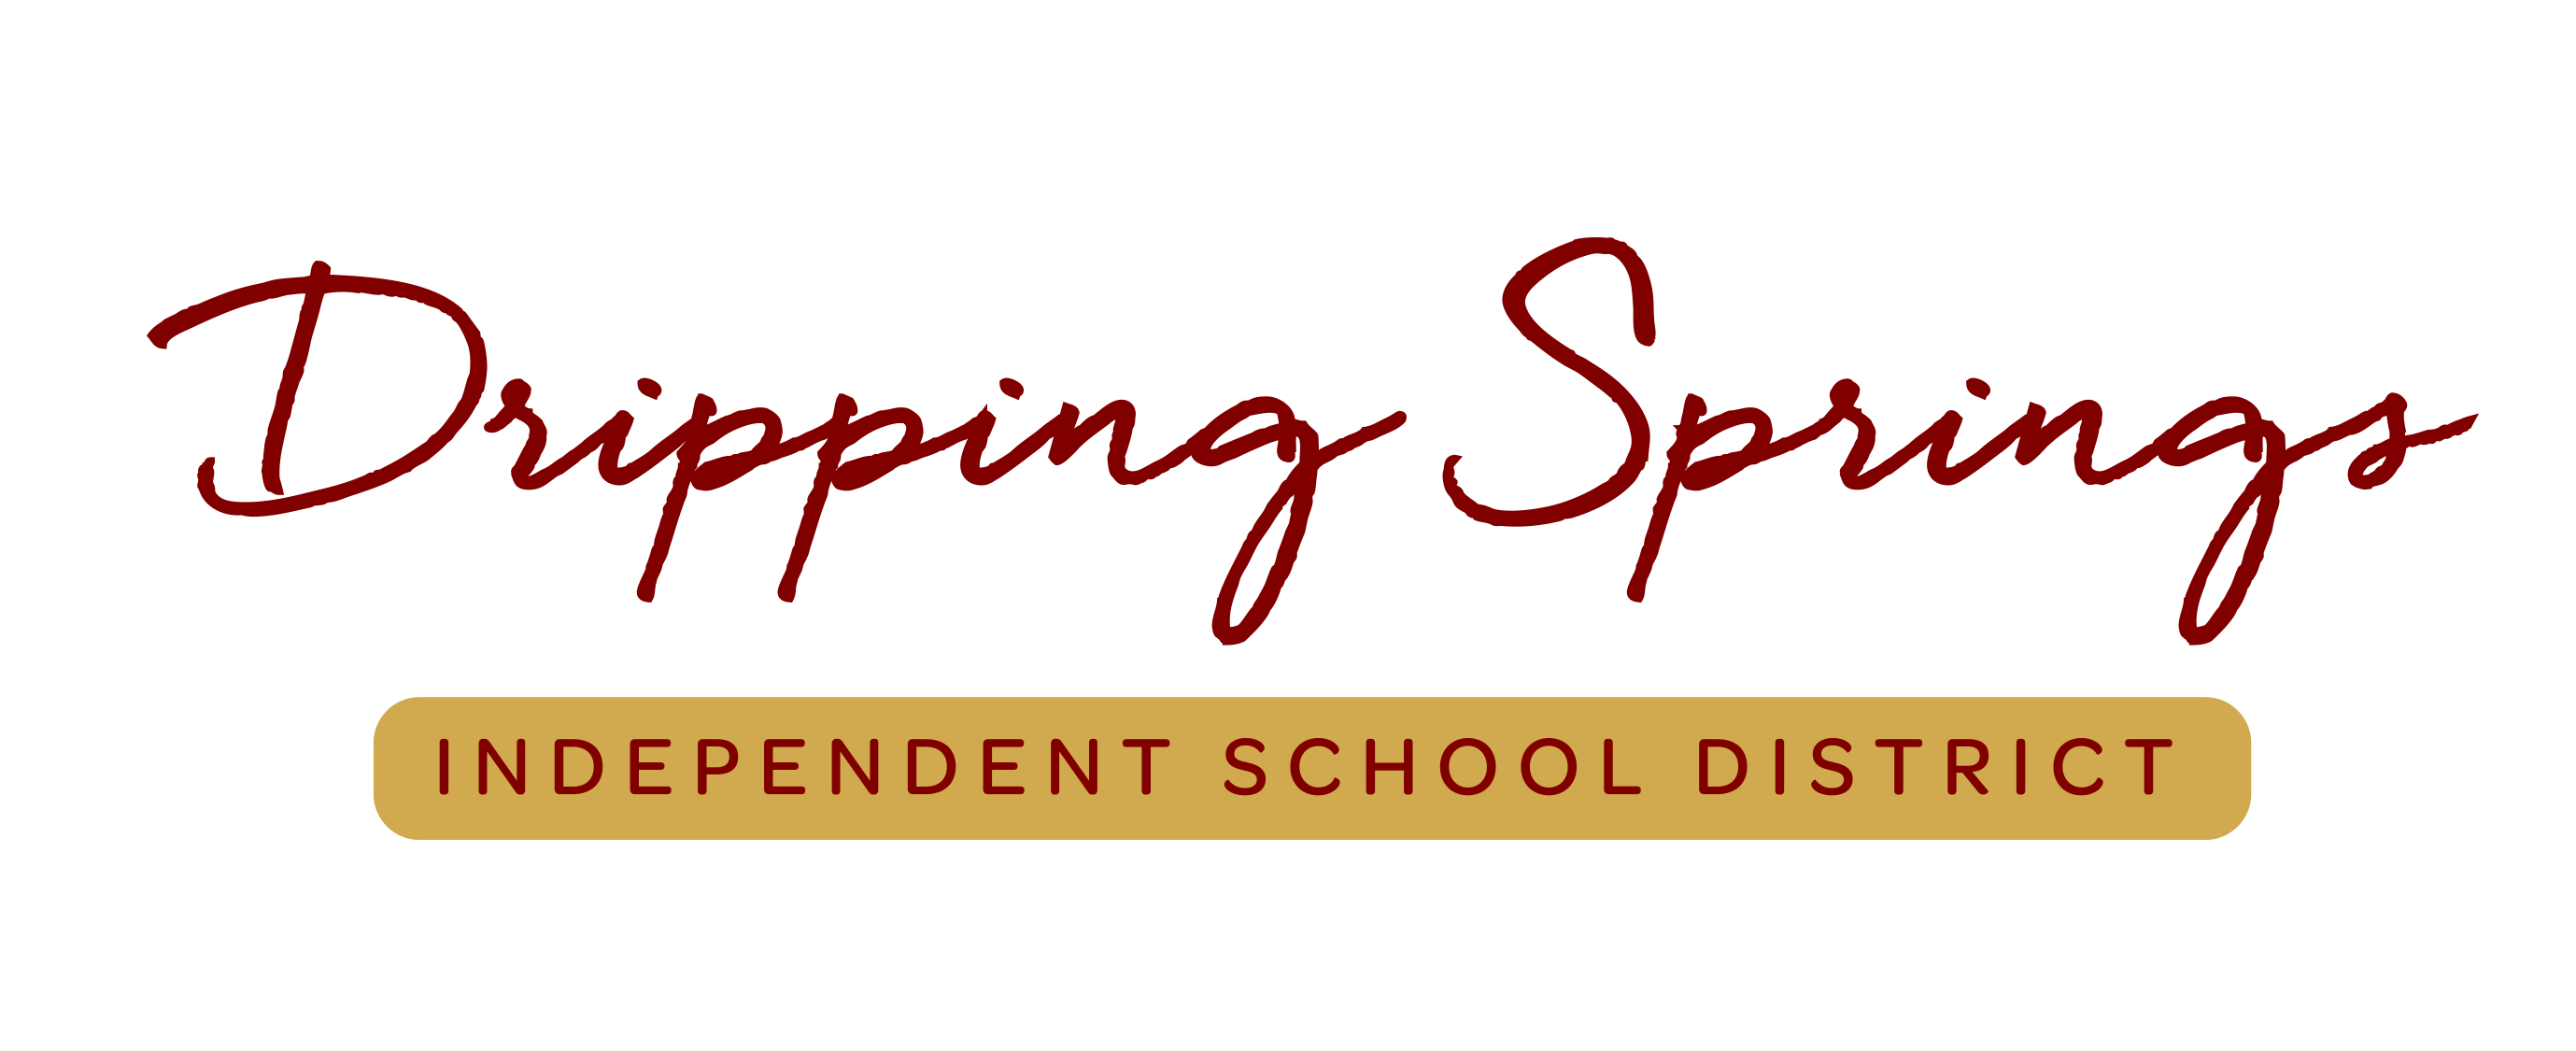 Dripping Springs ISD